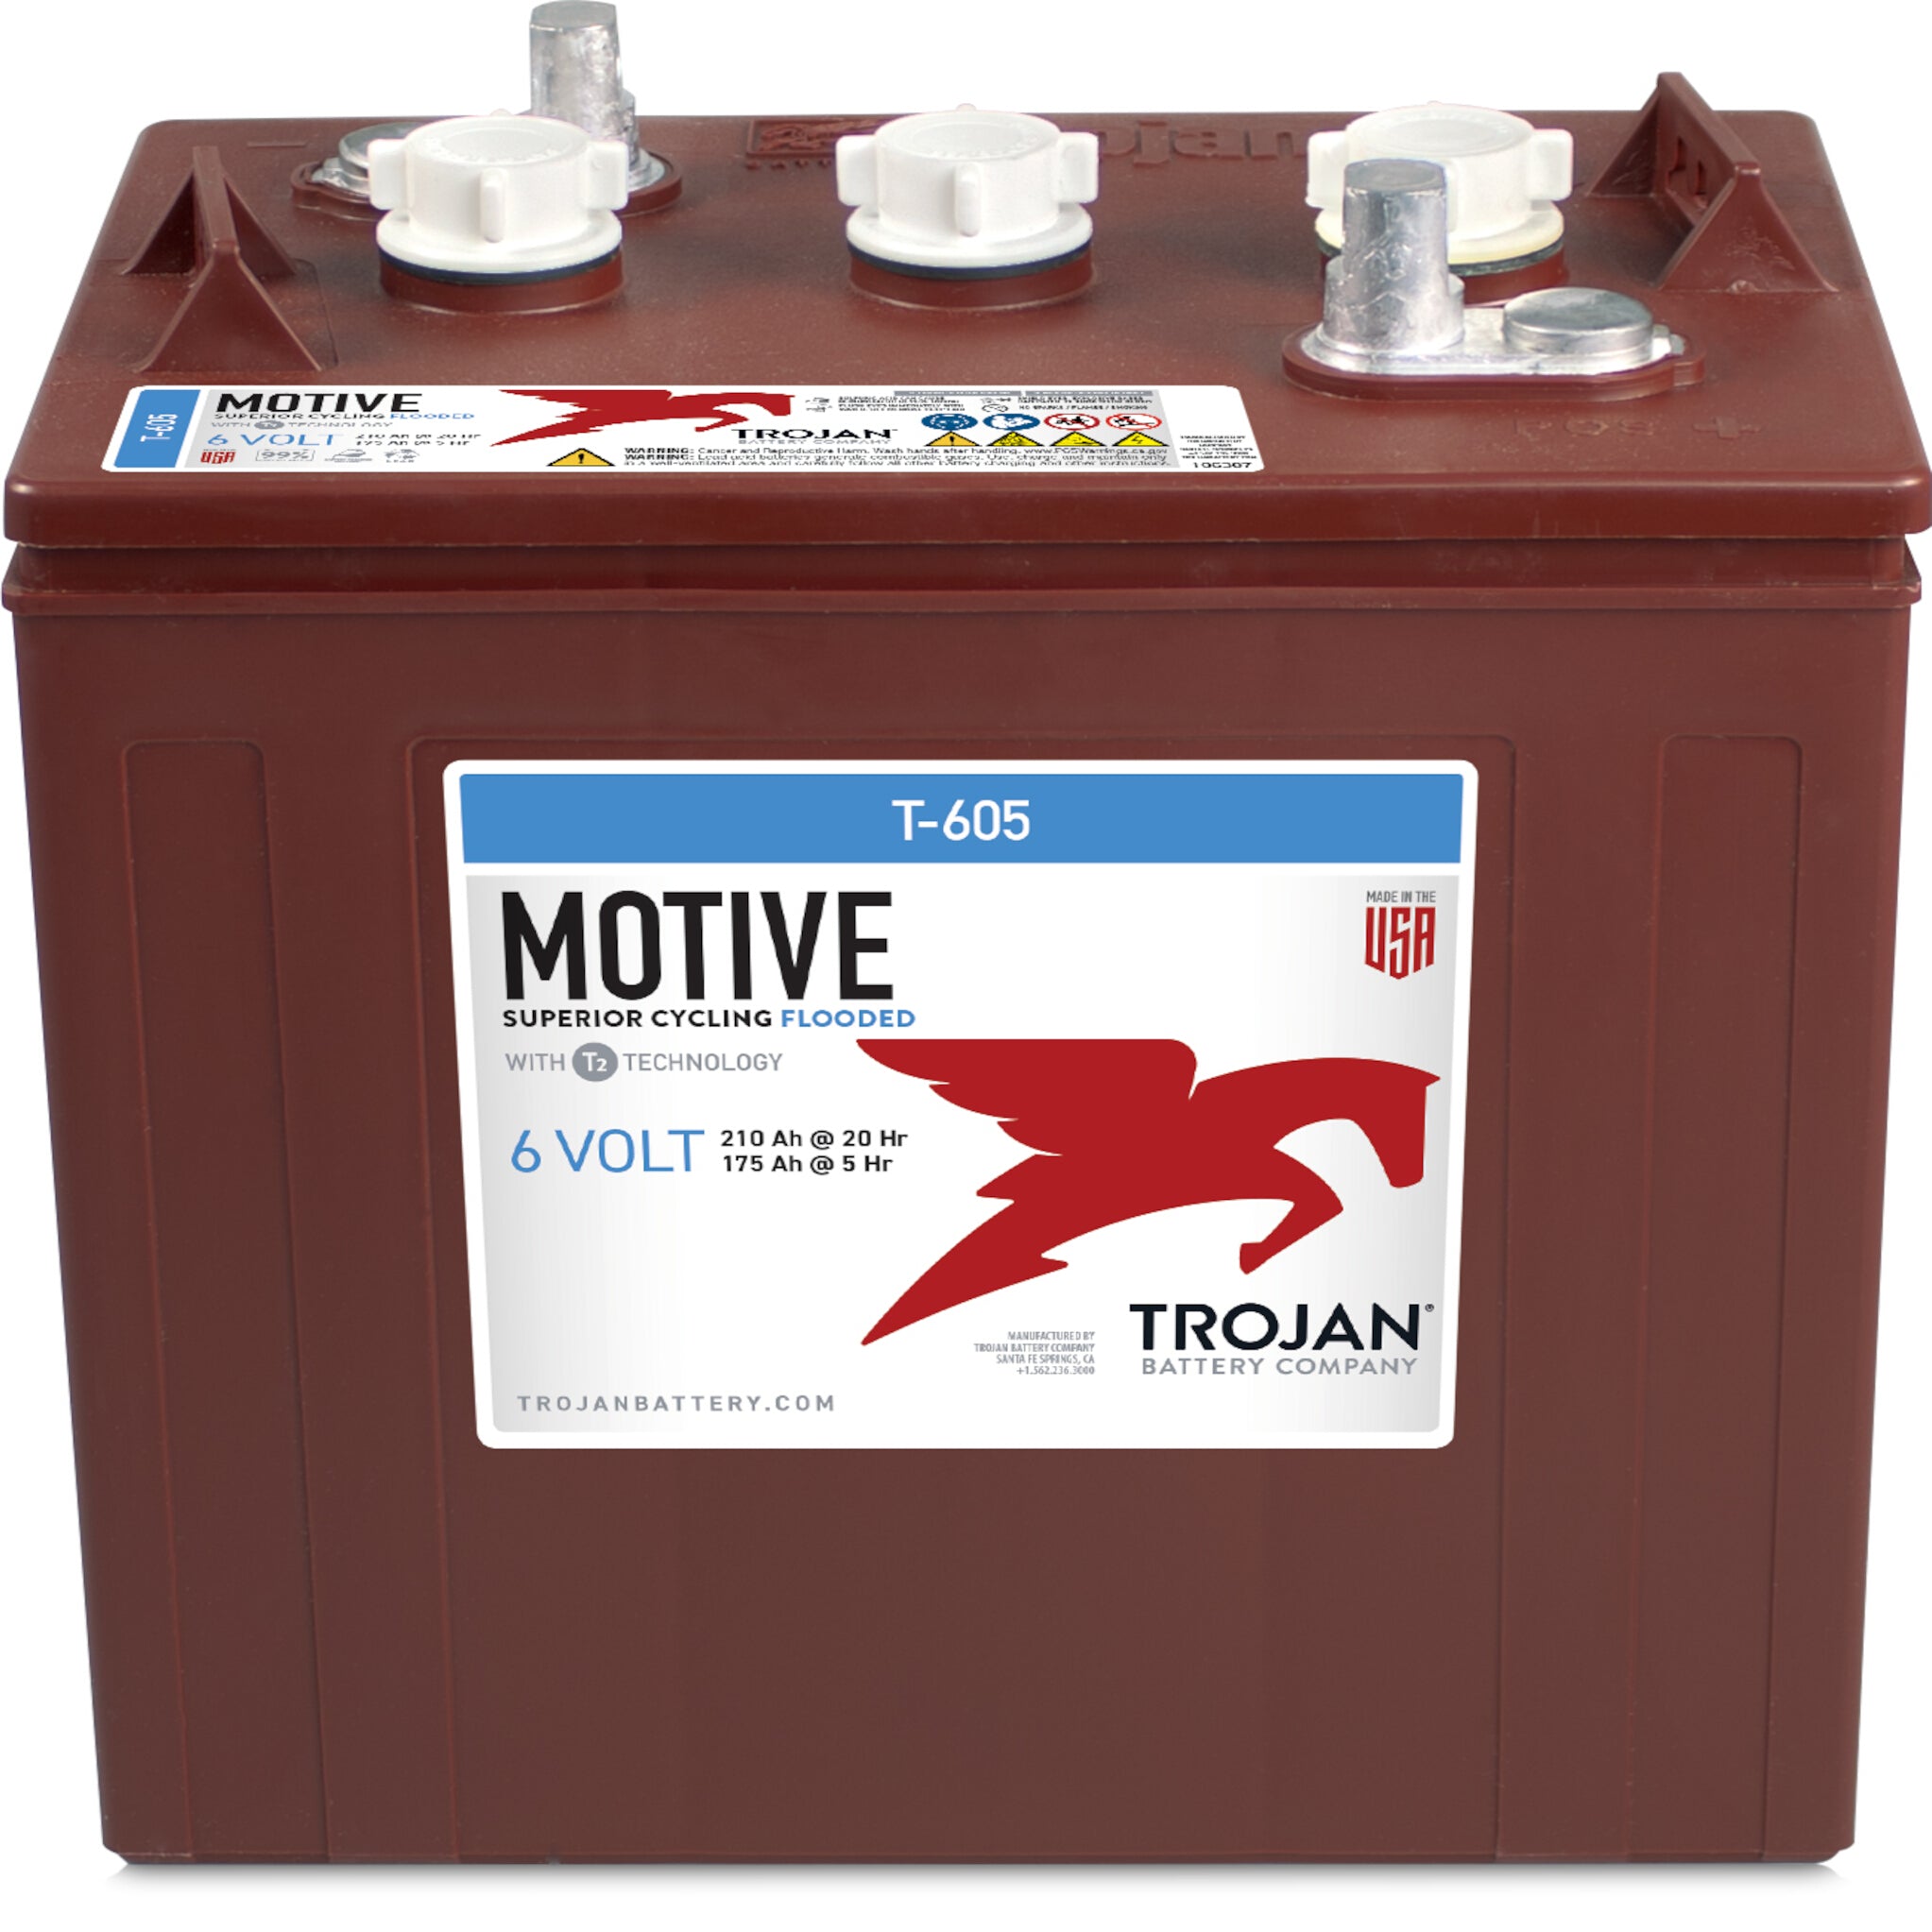 Trojan T-605 6V Group GC2 Deep Cycle Flooded Battery